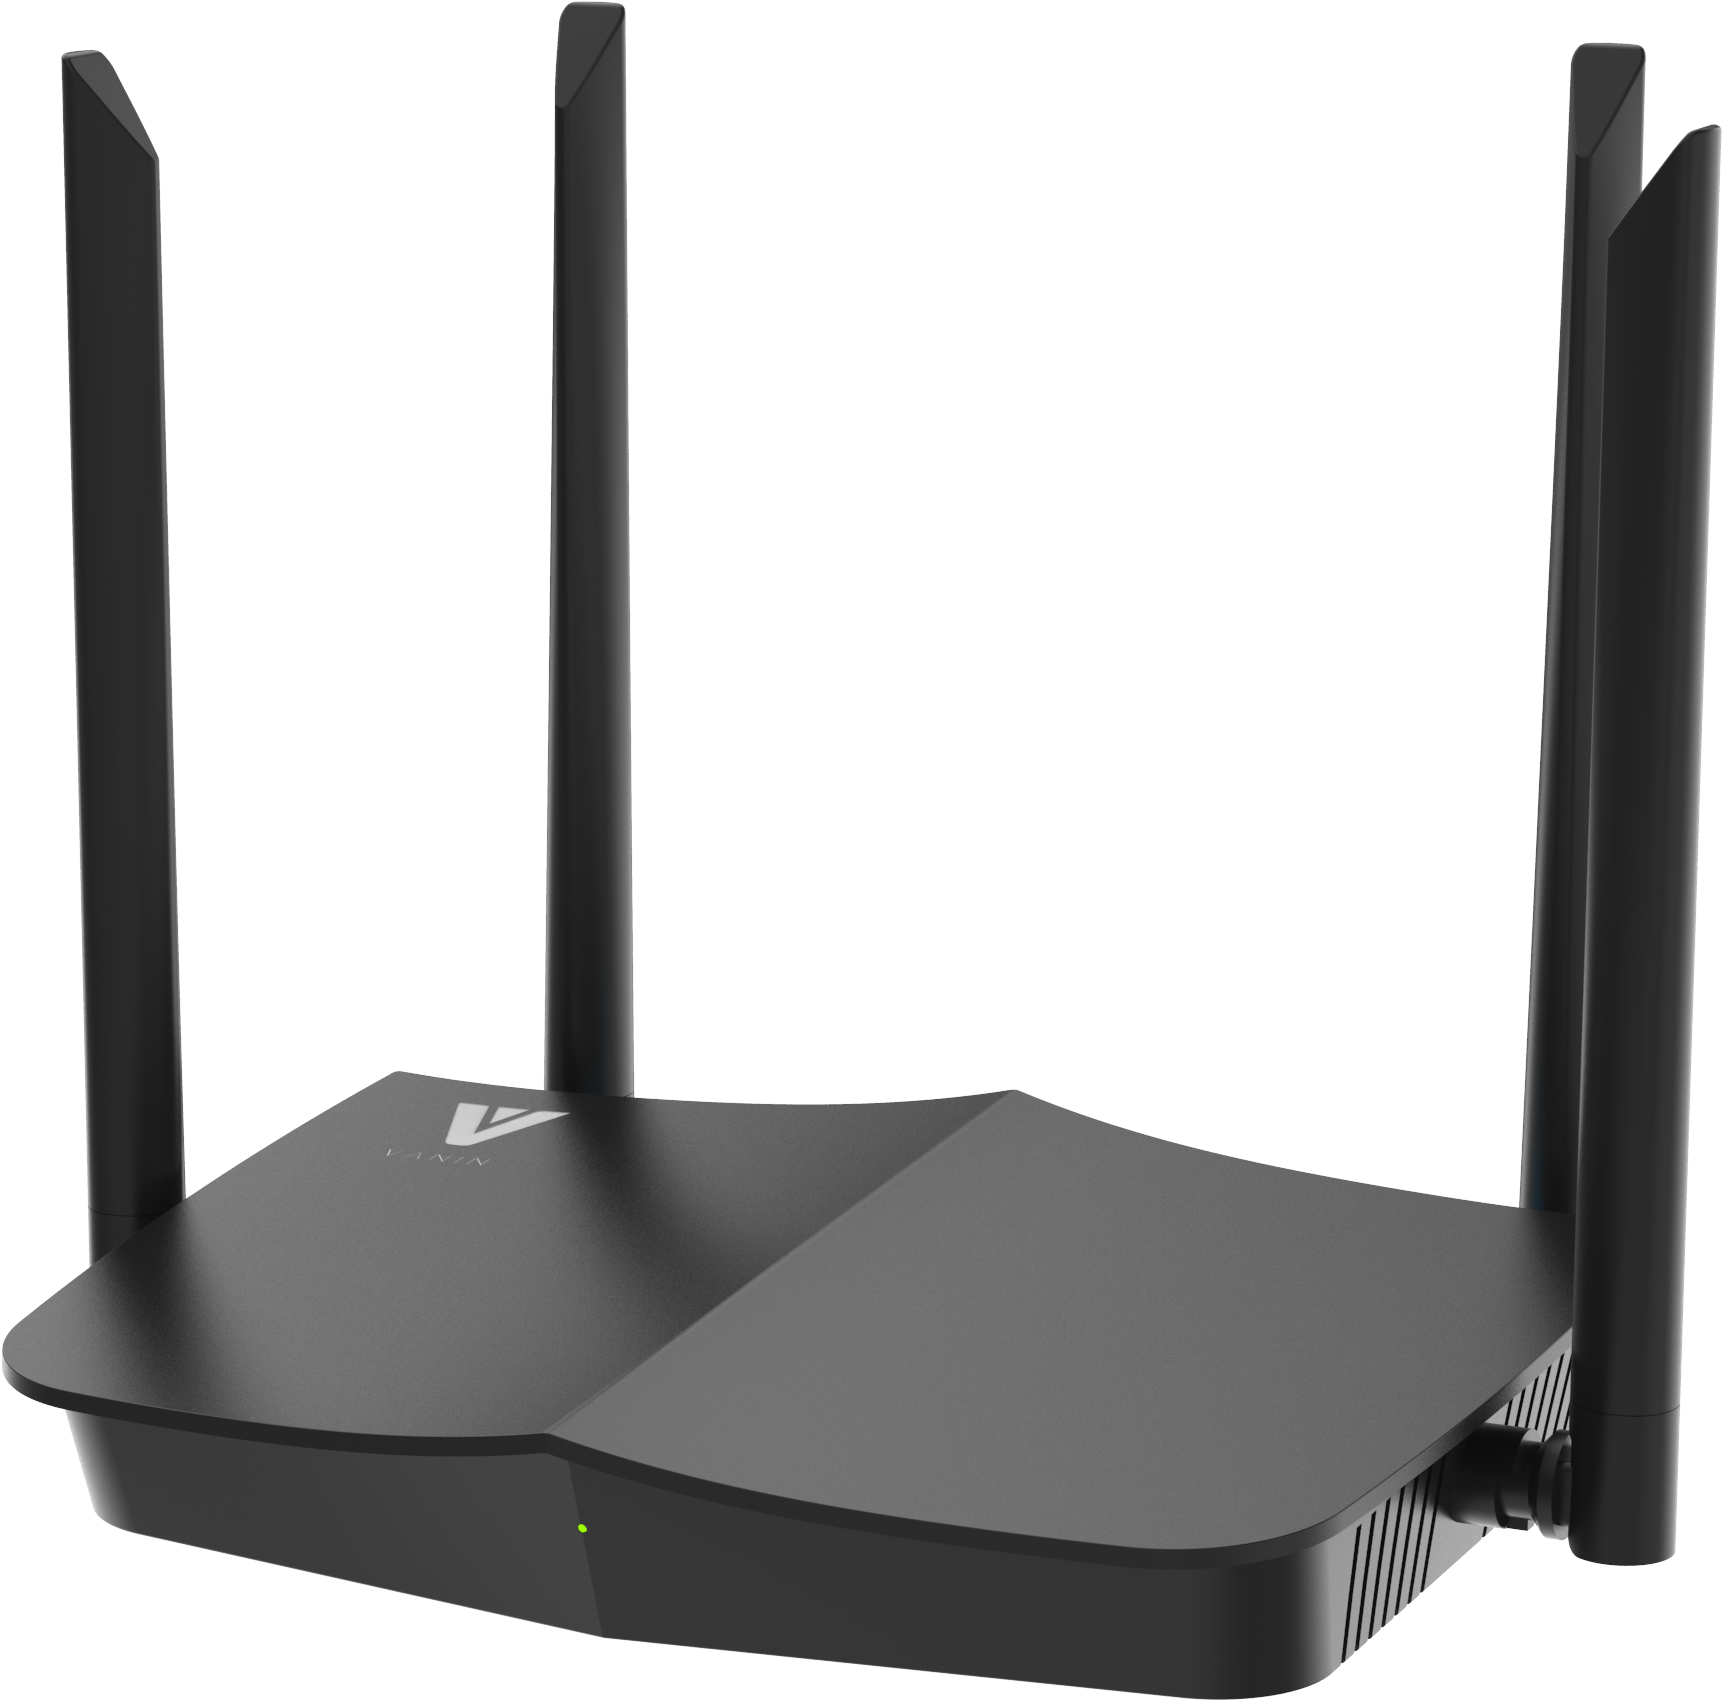 Modern Wireless Routerwith Antennas PNG